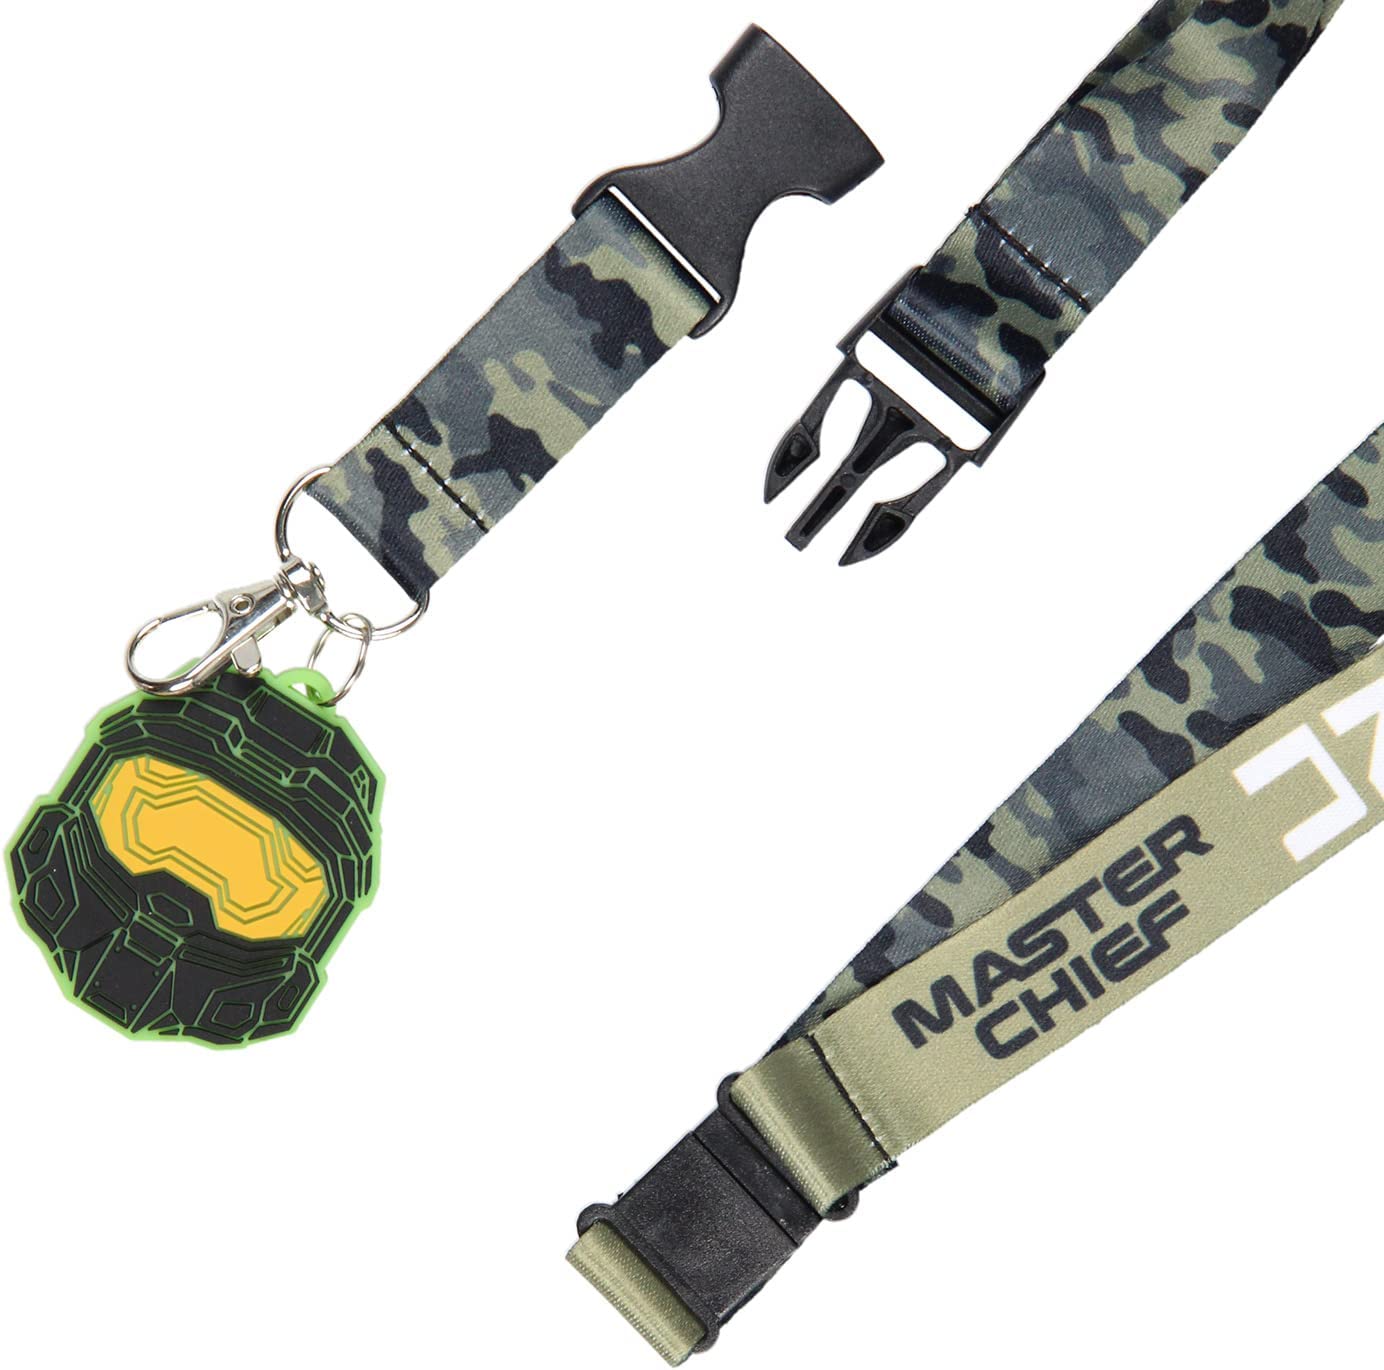 Halo Video Game Lanyard Keychain w/ 2 Master Chief Rubber Charm